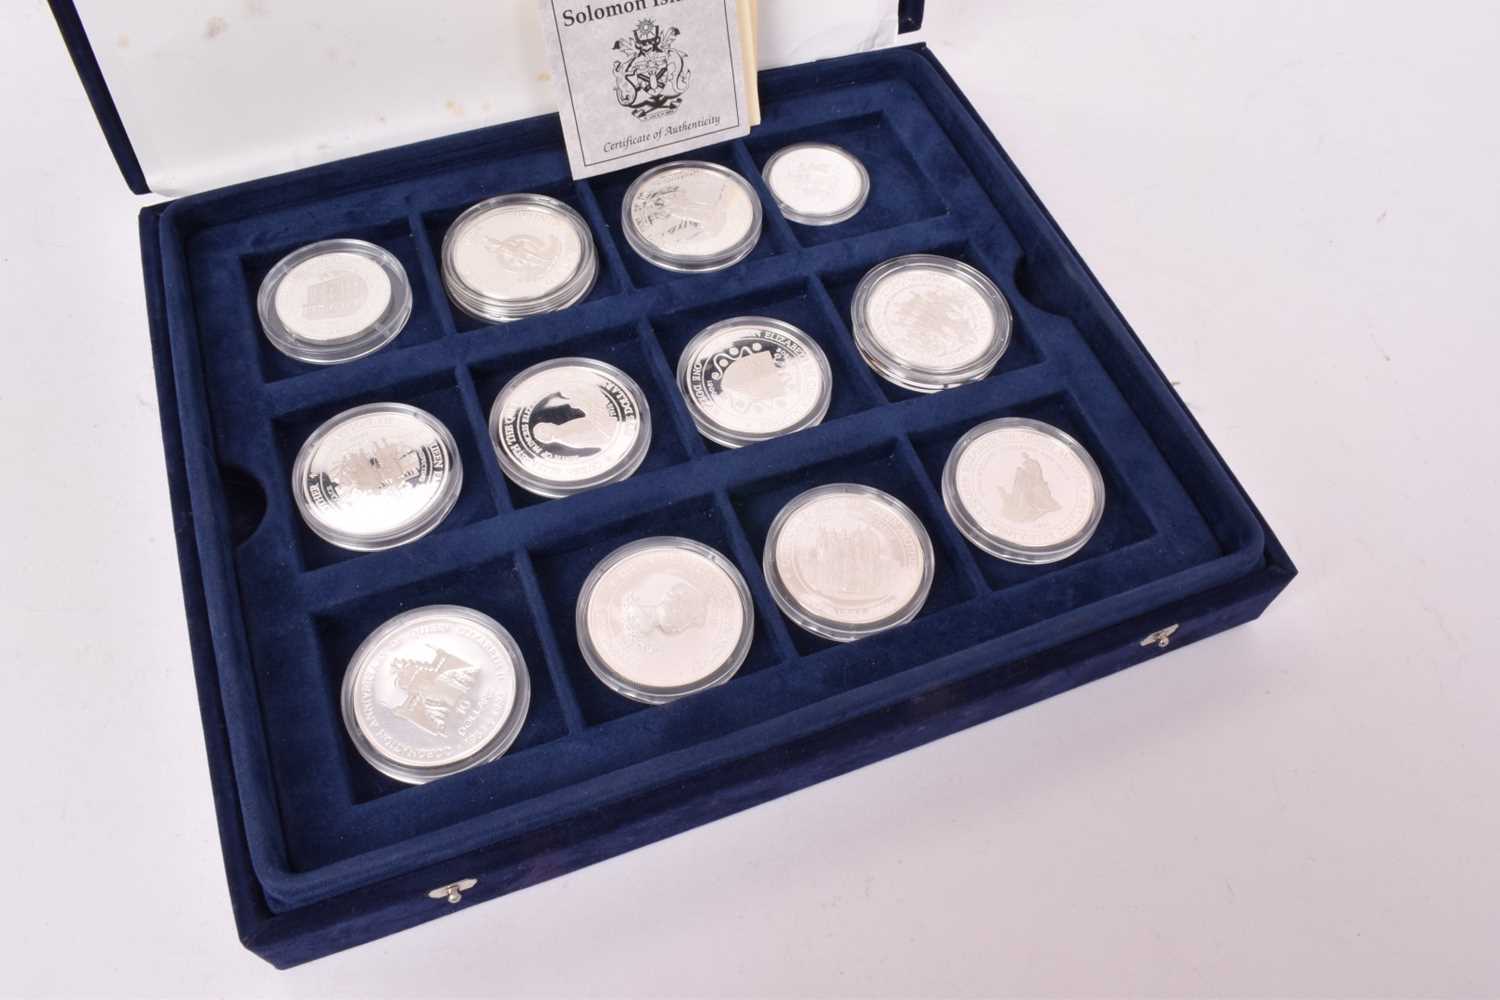 World - Royal Mint issued silver proof coins commemorating 'Lady of the Century' - The Queen Mother - Image 2 of 2